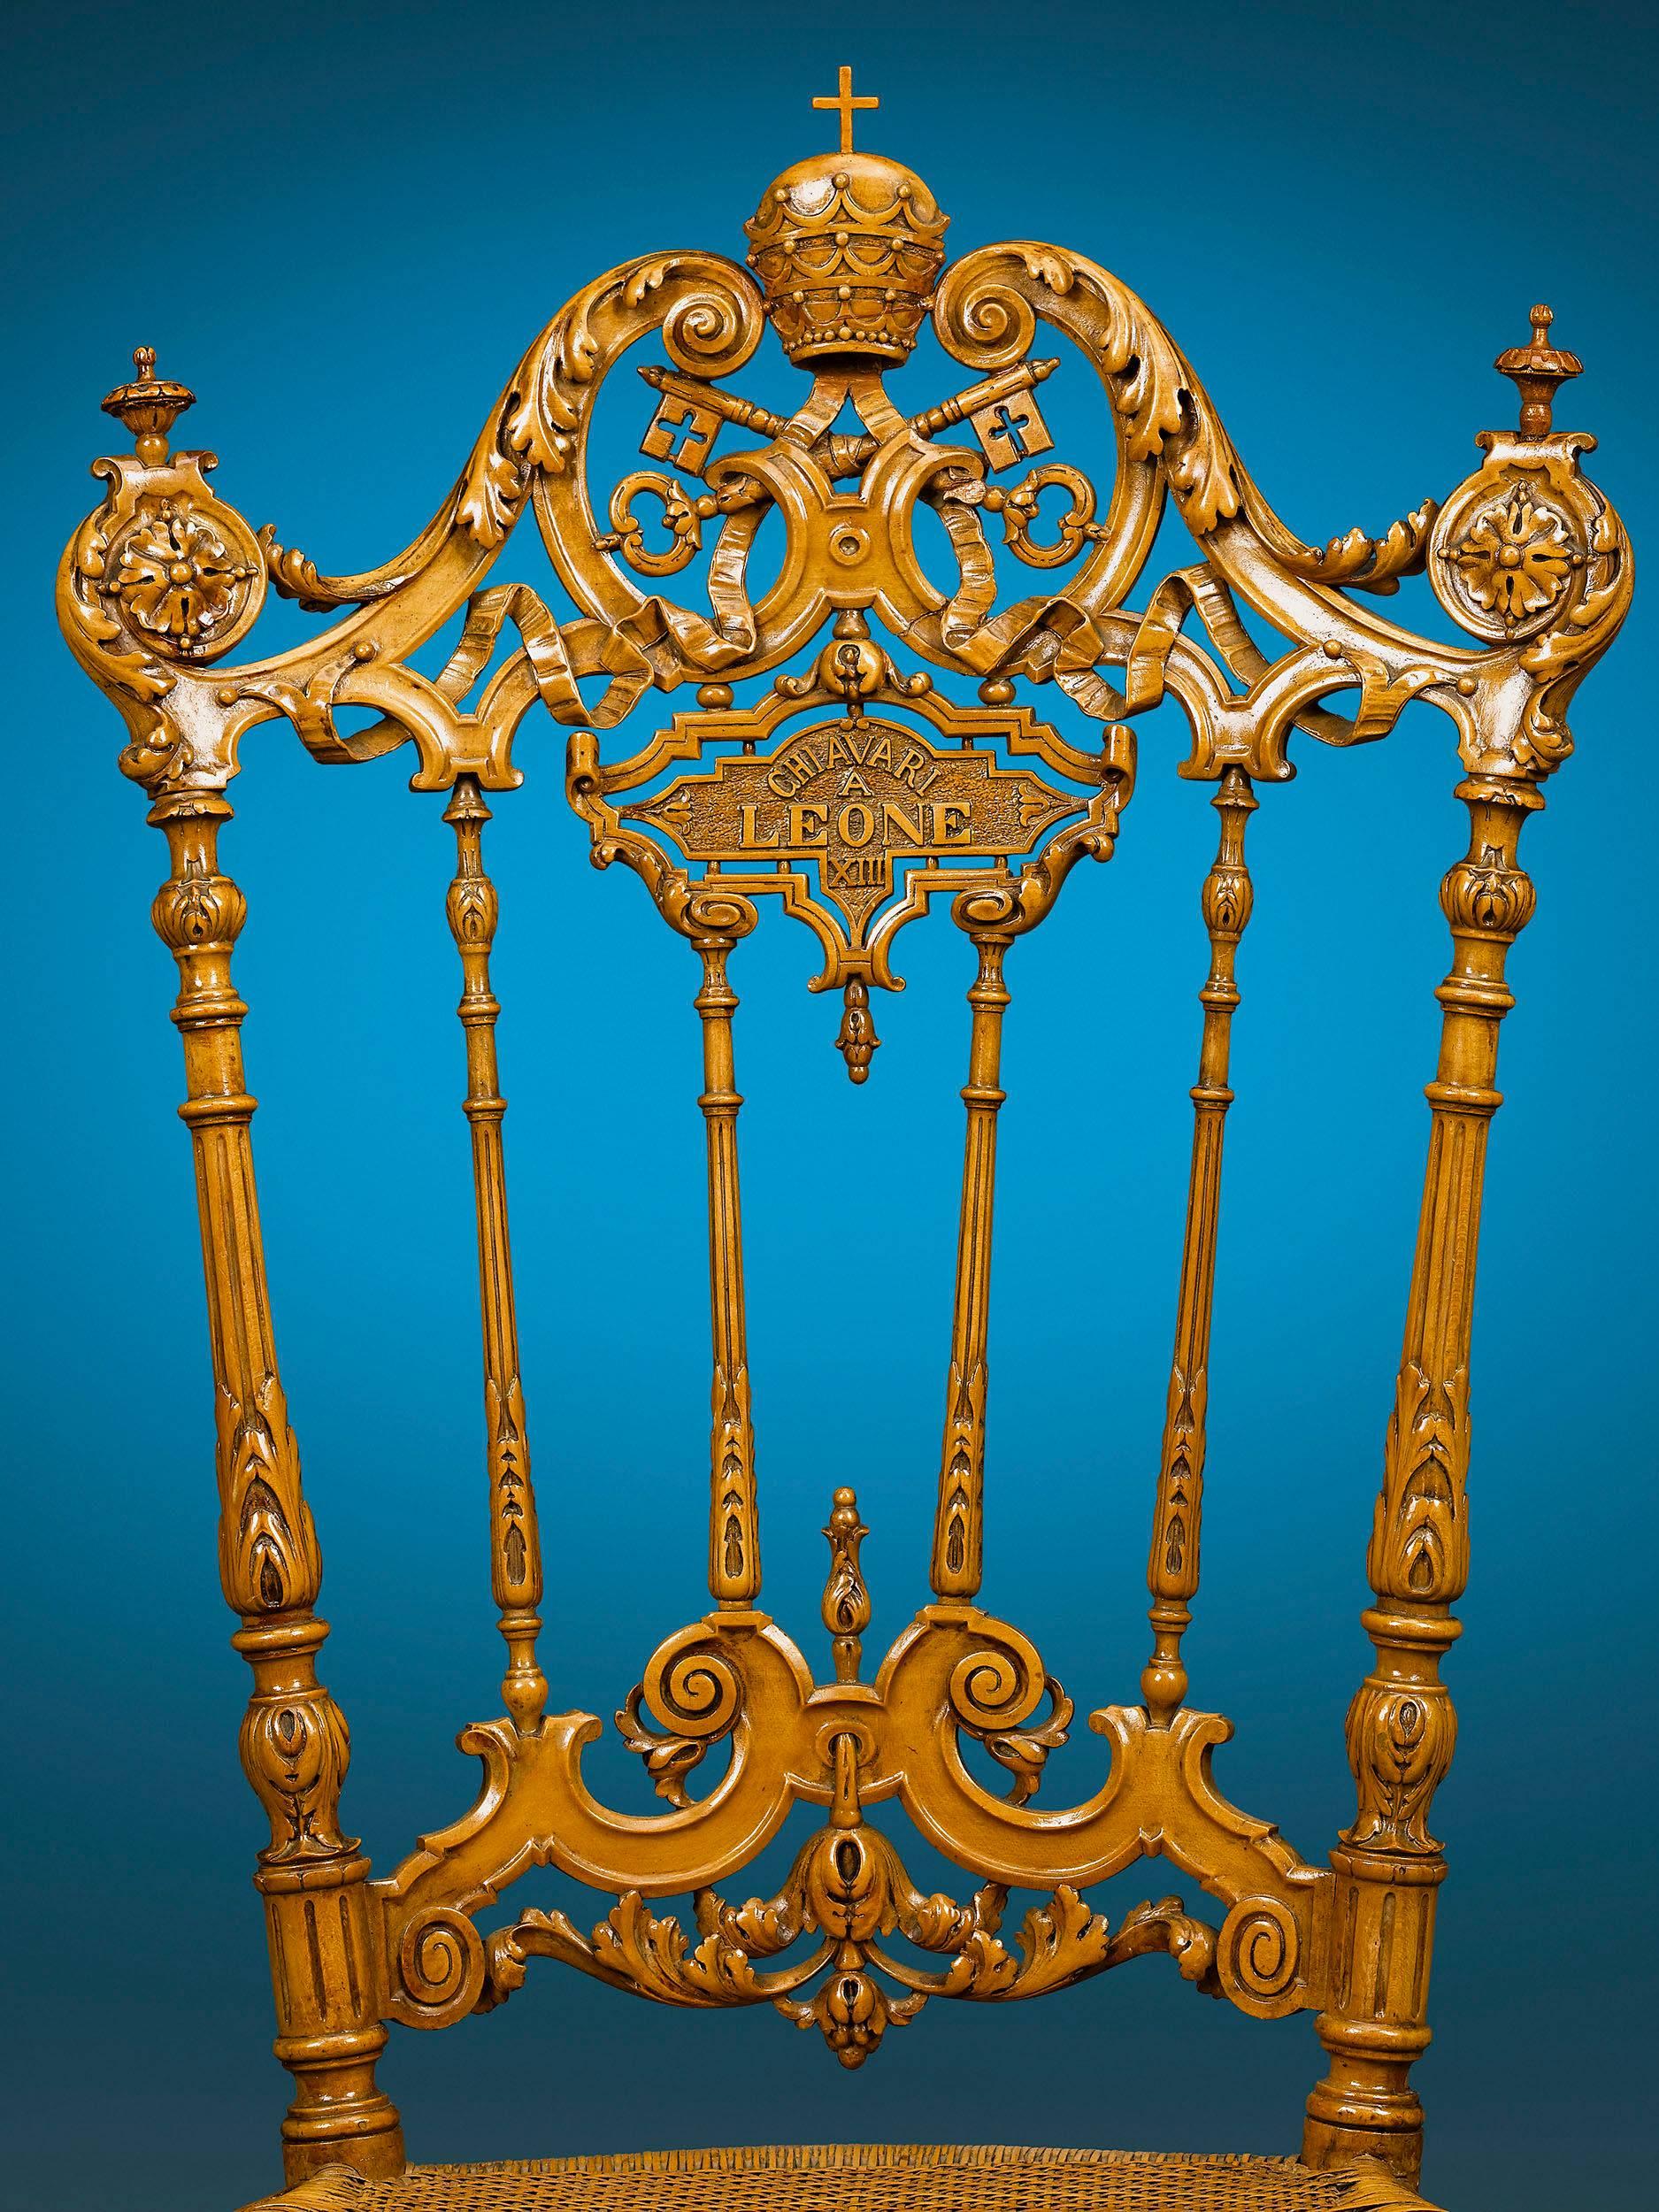 This extraordinary pair of Italian lemonwood chairs boasts a remarkable history. The rare and important set was given to Pope Leo XIII by the Italian City of Chiavari, a city that is renowned for their incredibly unique furniture design, including